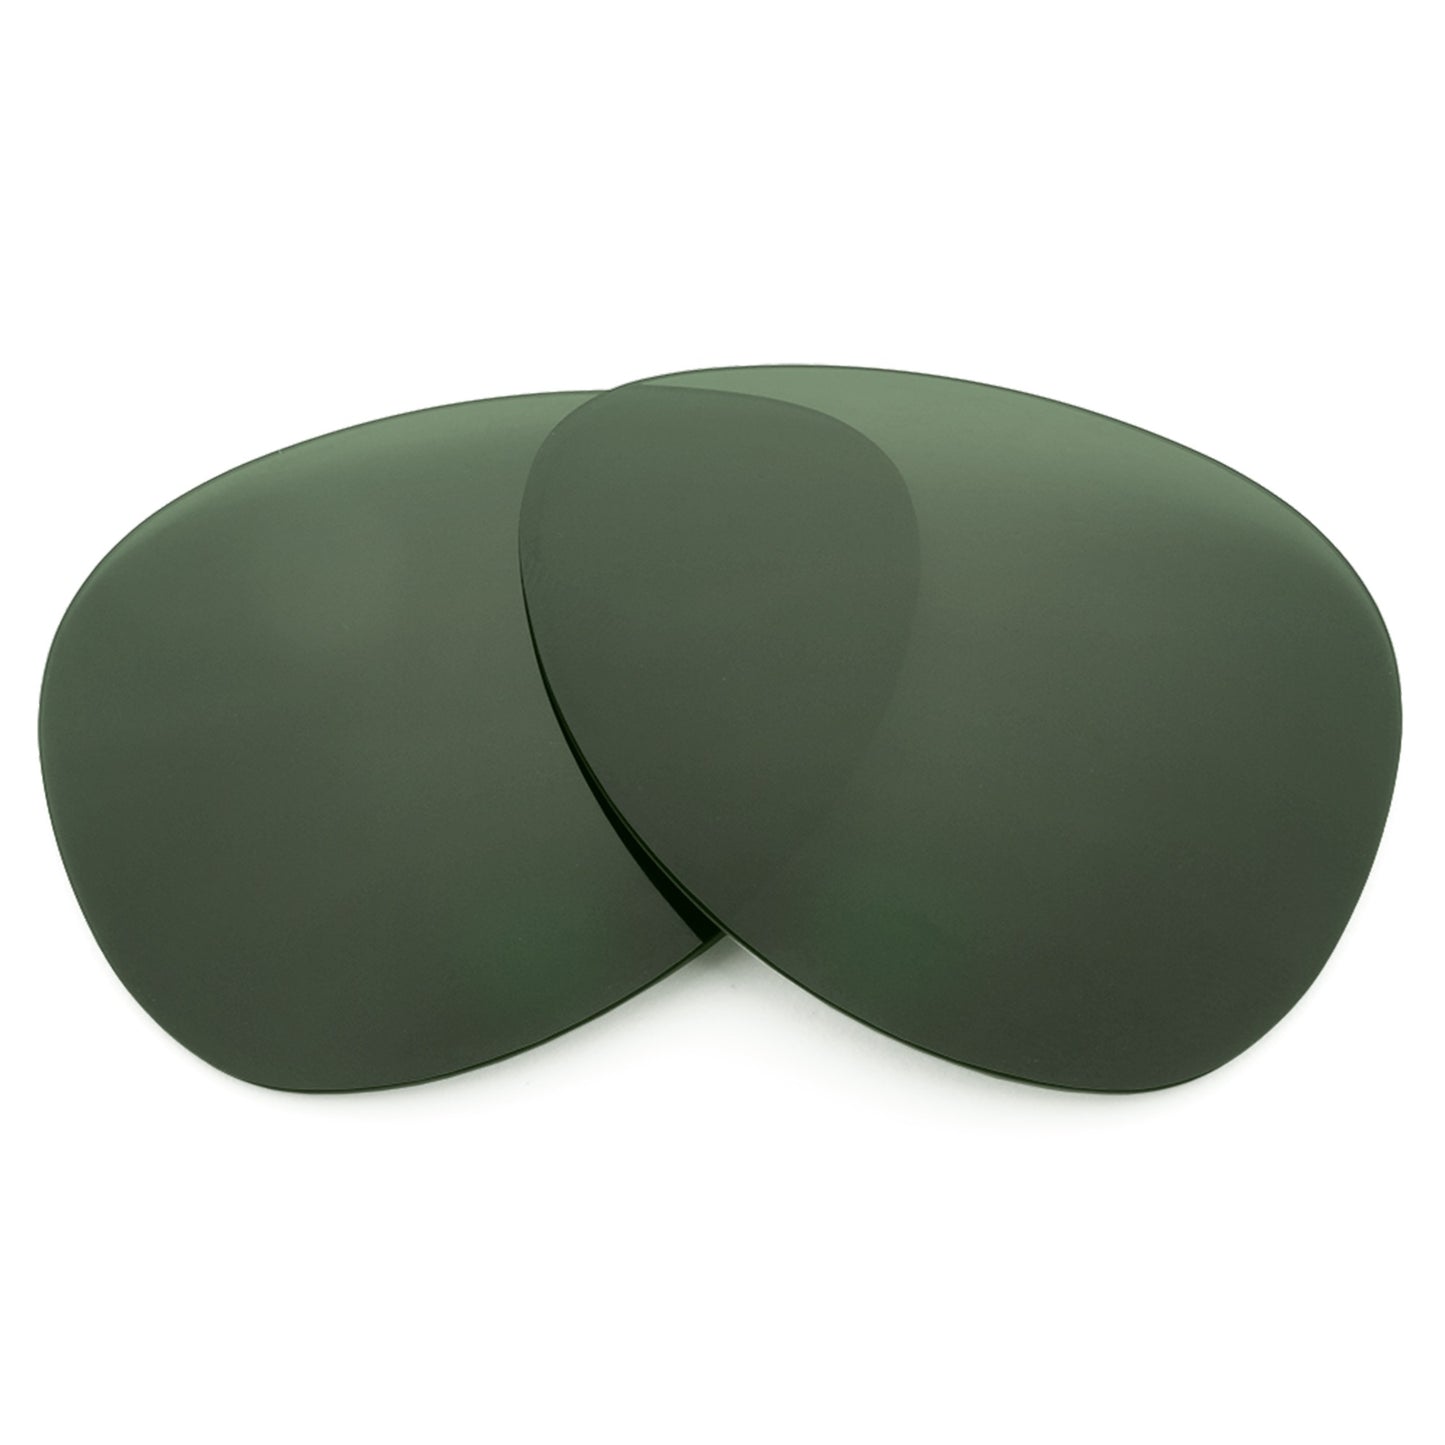 Revant replacement lenses for Ray-Ban Aviator Junior Remix RJ9506S 50mm Non-Polarized Gray Green